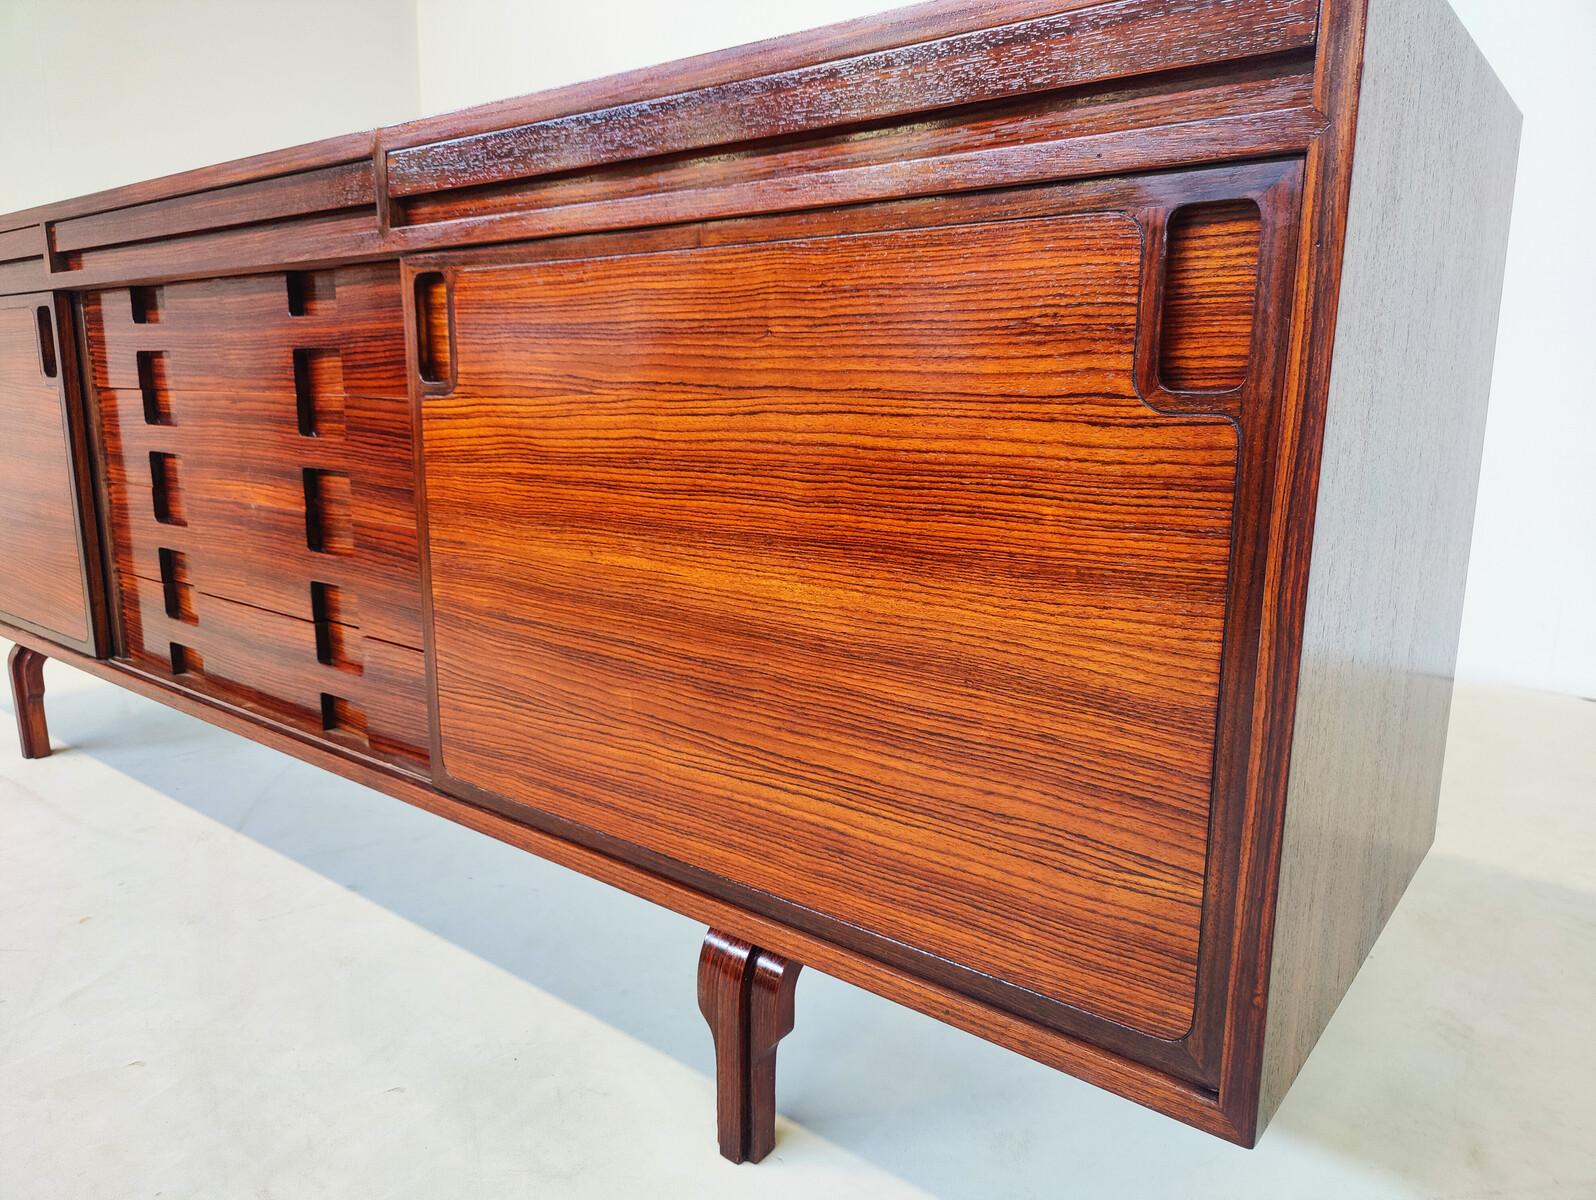 Mid-20th Century Mid-Century Modern Sideboard by Renato Magri for Cantieri Carugati, Italy, 1960s